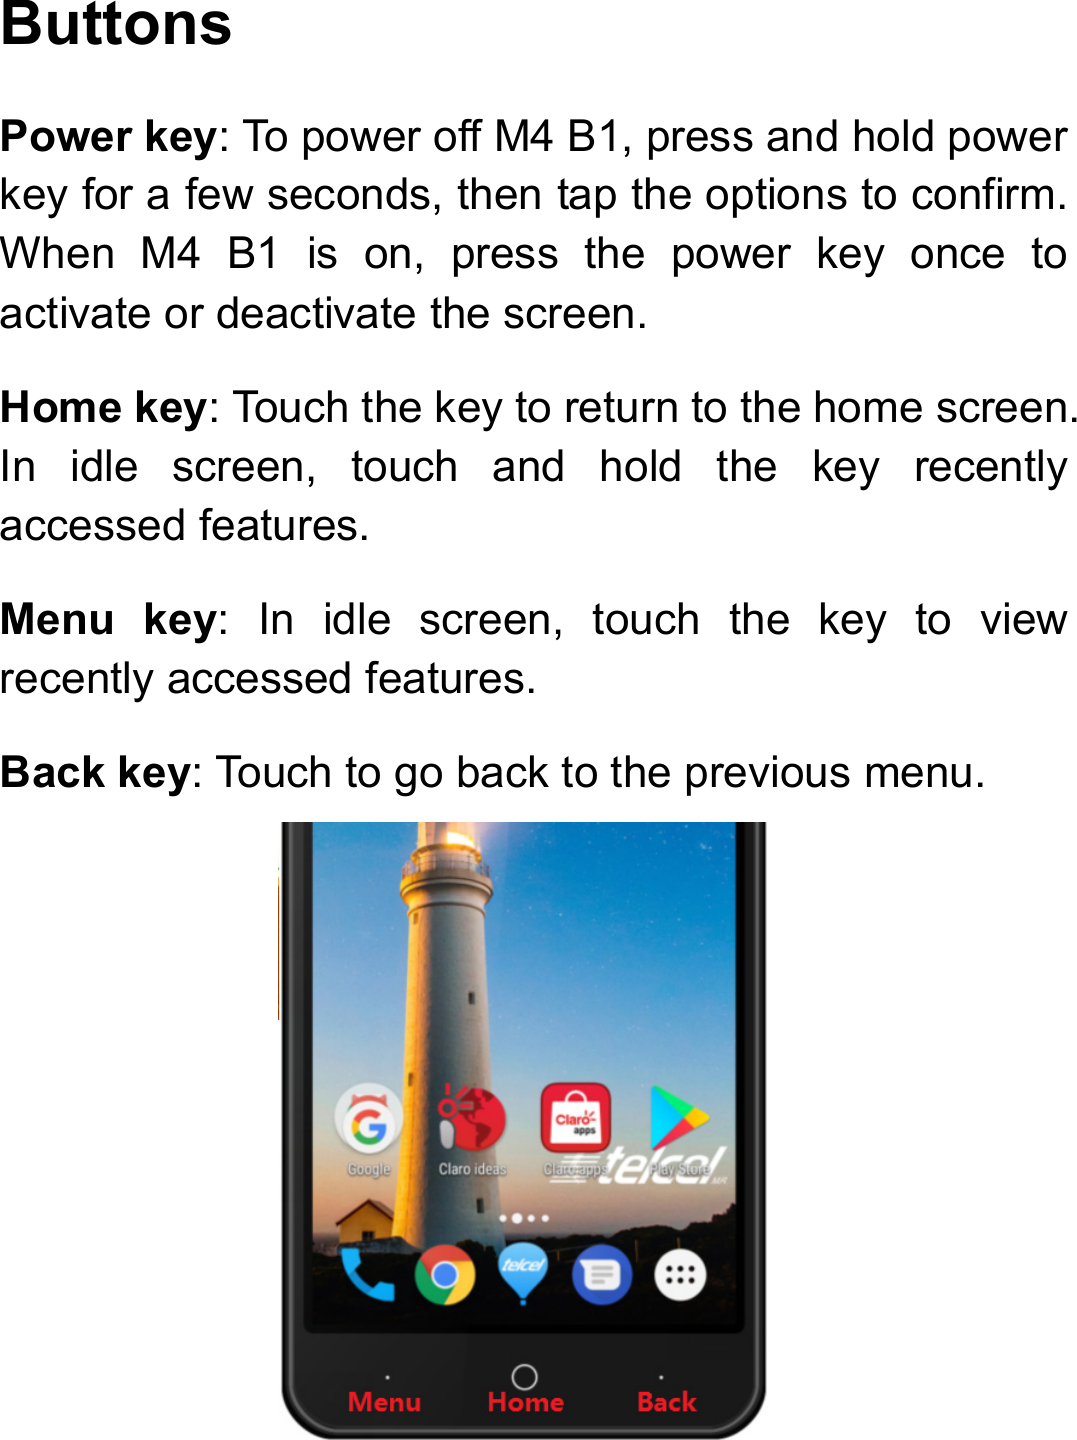 Buttons Power key: To power off M4 B1, press and hold power key for a few seconds, then tap the options to confirm. When M4 B1 is on, press the power key once to activate or deactivate the screen.   Home key: Touch the key to return to the home screen. In idle screen, touch and hold the key recently accessed features. Menu key: In idle screen, touch the key to view recently accessed features. Back key: Touch to go back to the previous menu.  